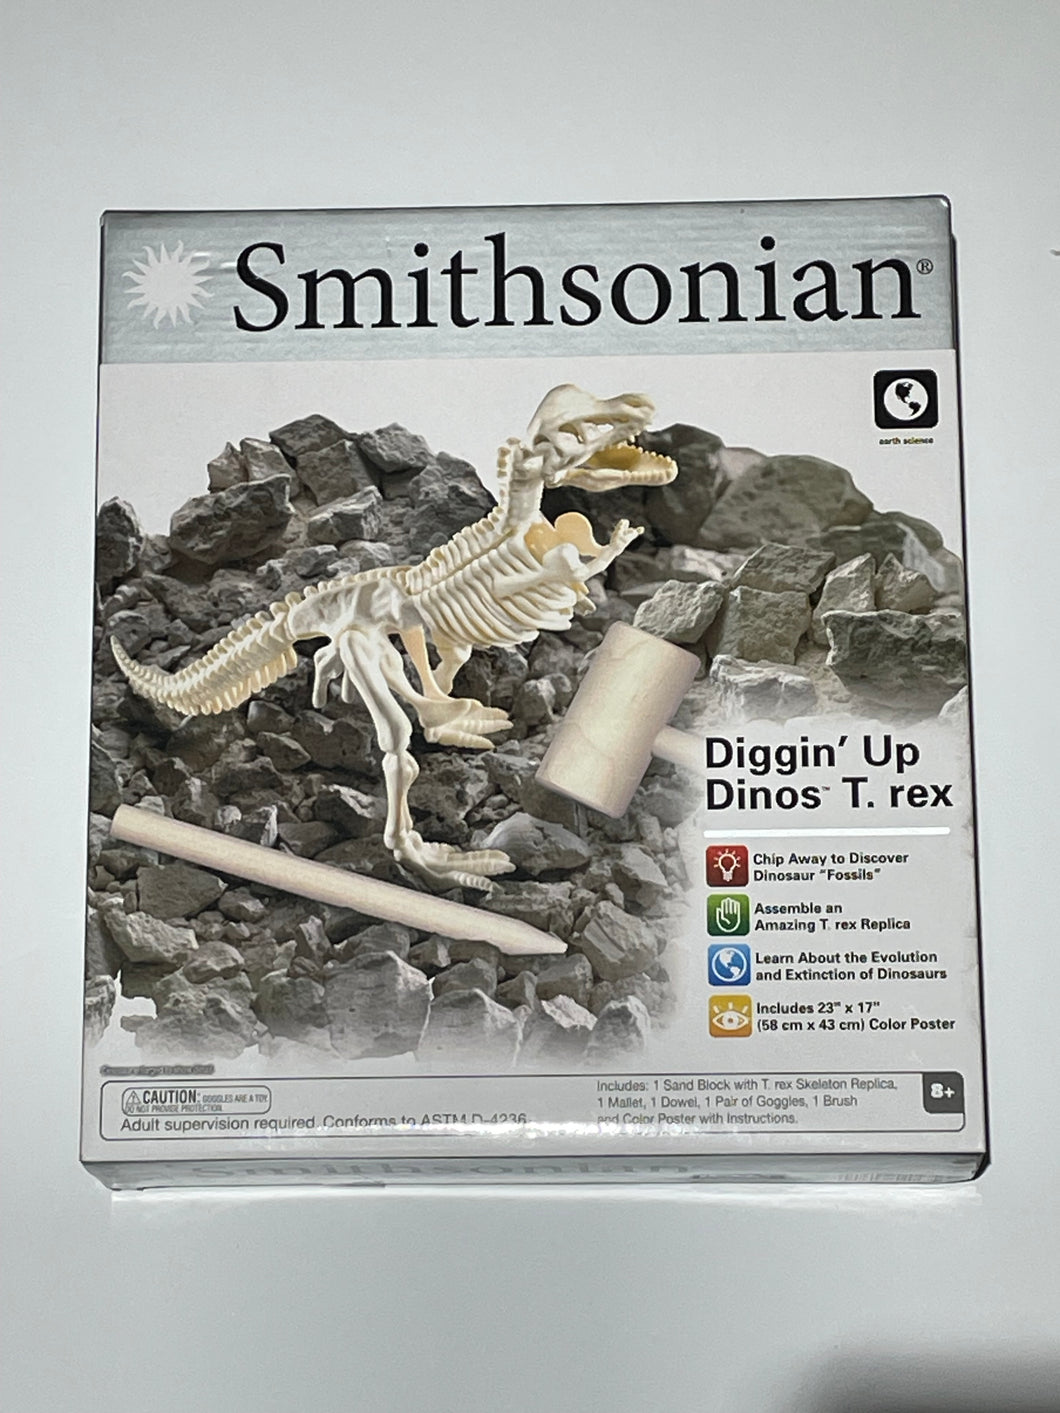 Smithsonian Dino dig, New never opened